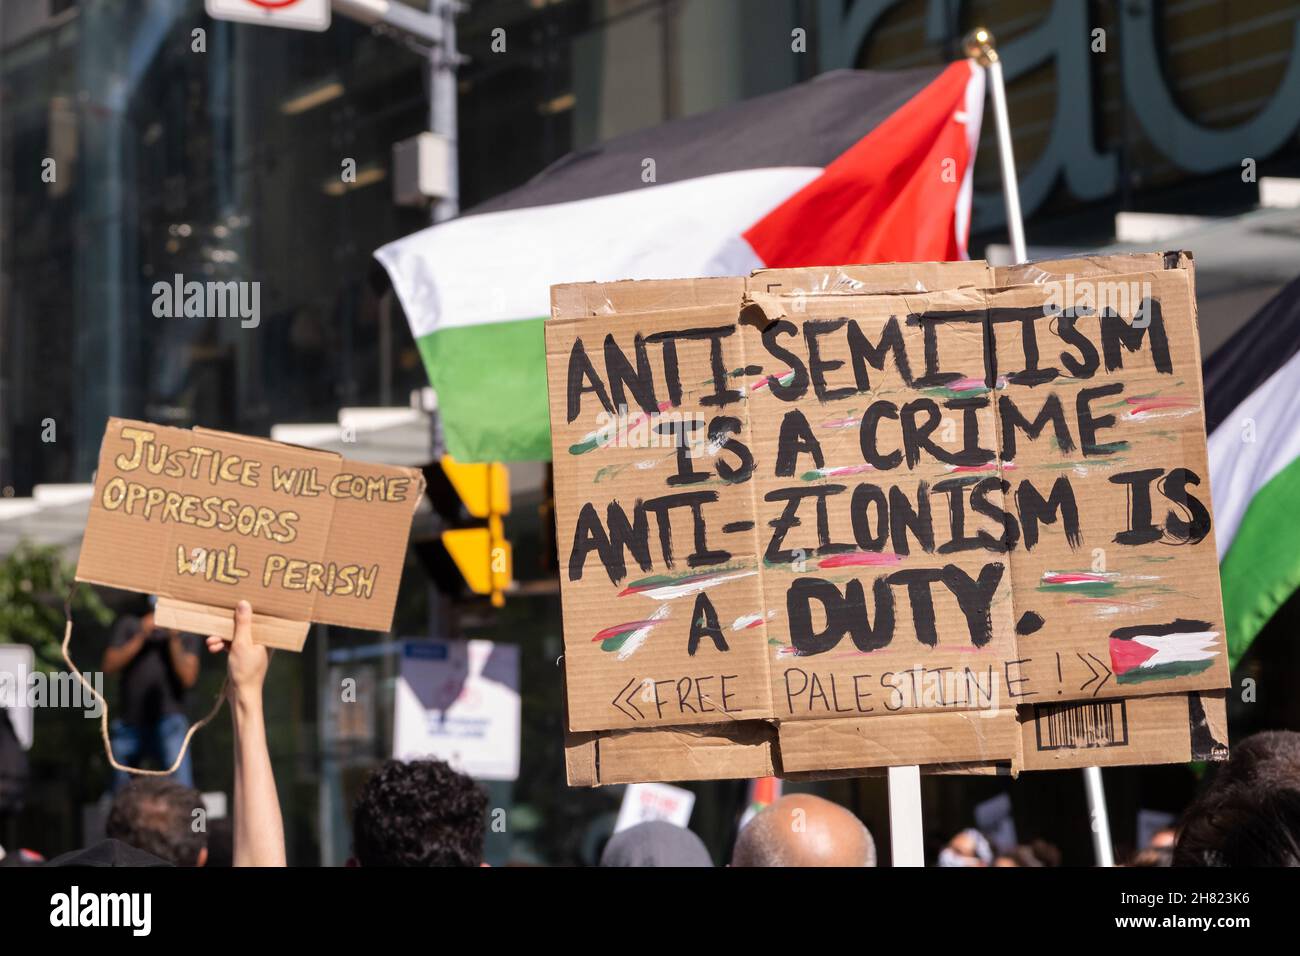 Protestors hold anti-Israel signage and wave Palestinian flags at a pro-Palestinian event in Toronto, Ontario. Stock Photo